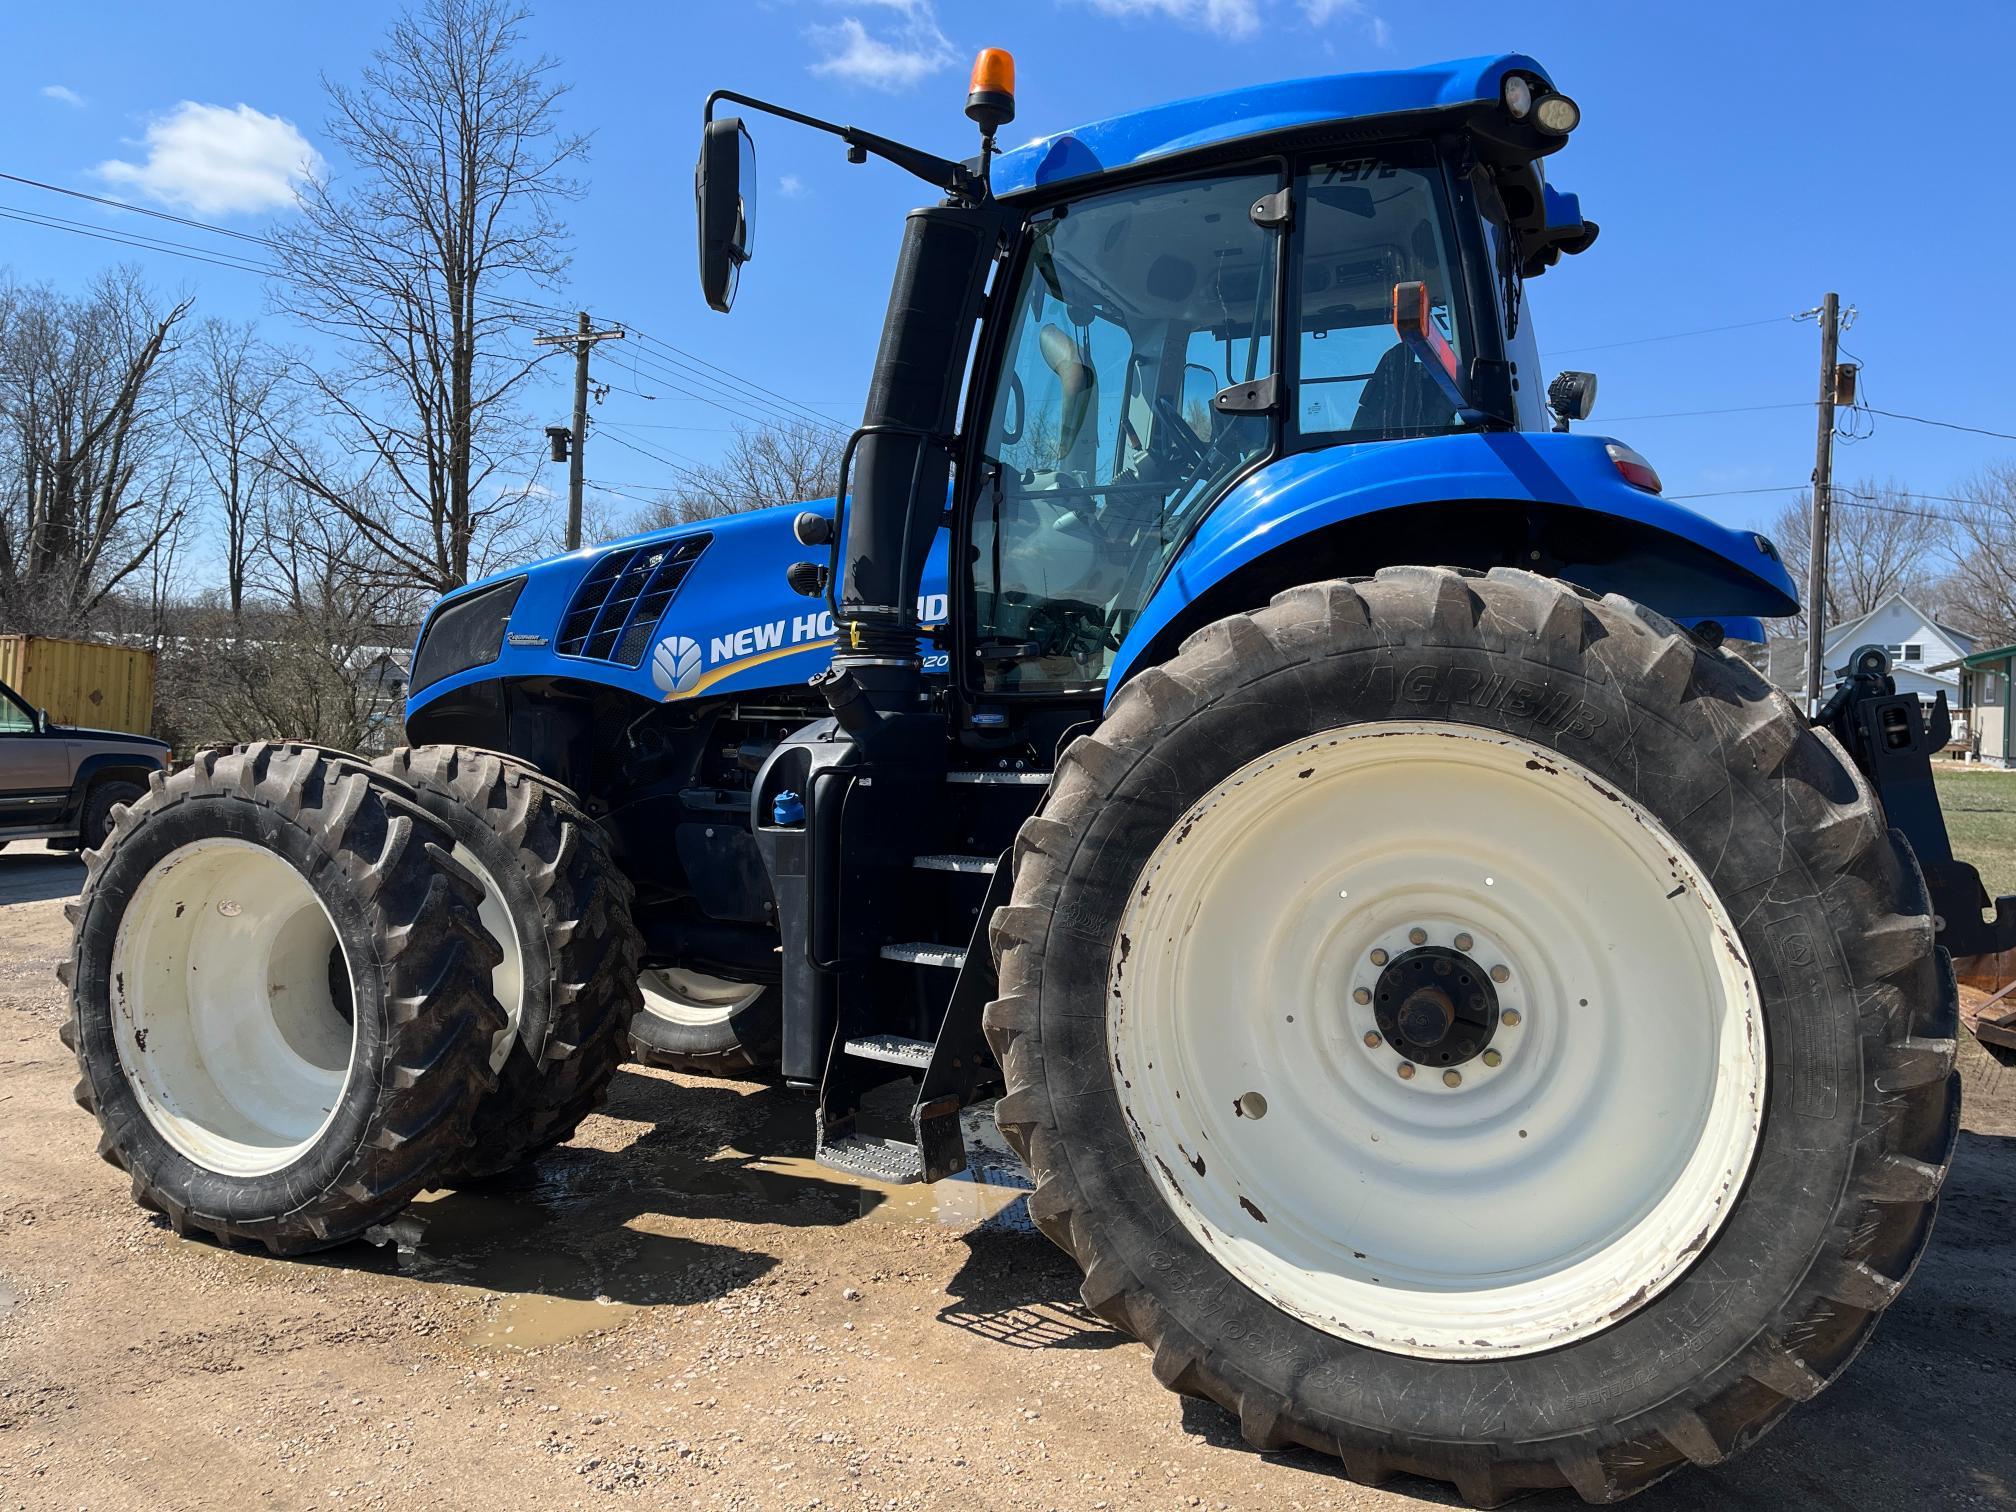 New Holland T8.320 Tractor